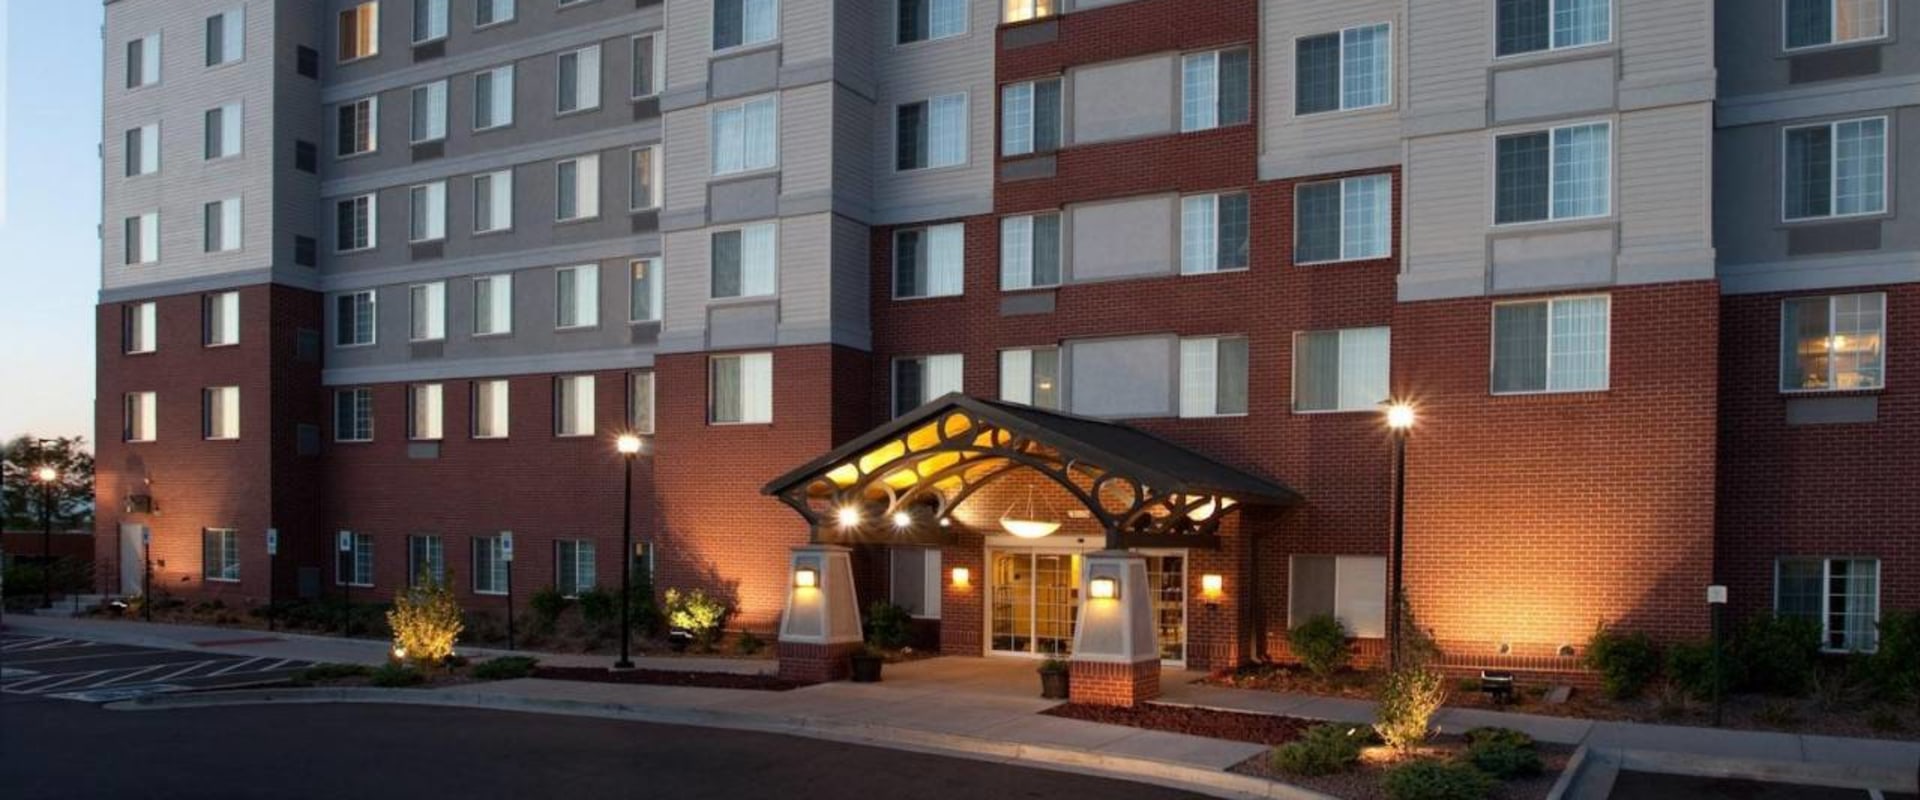 What Payment Methods are Accepted at Suites in Denver, Colorado?